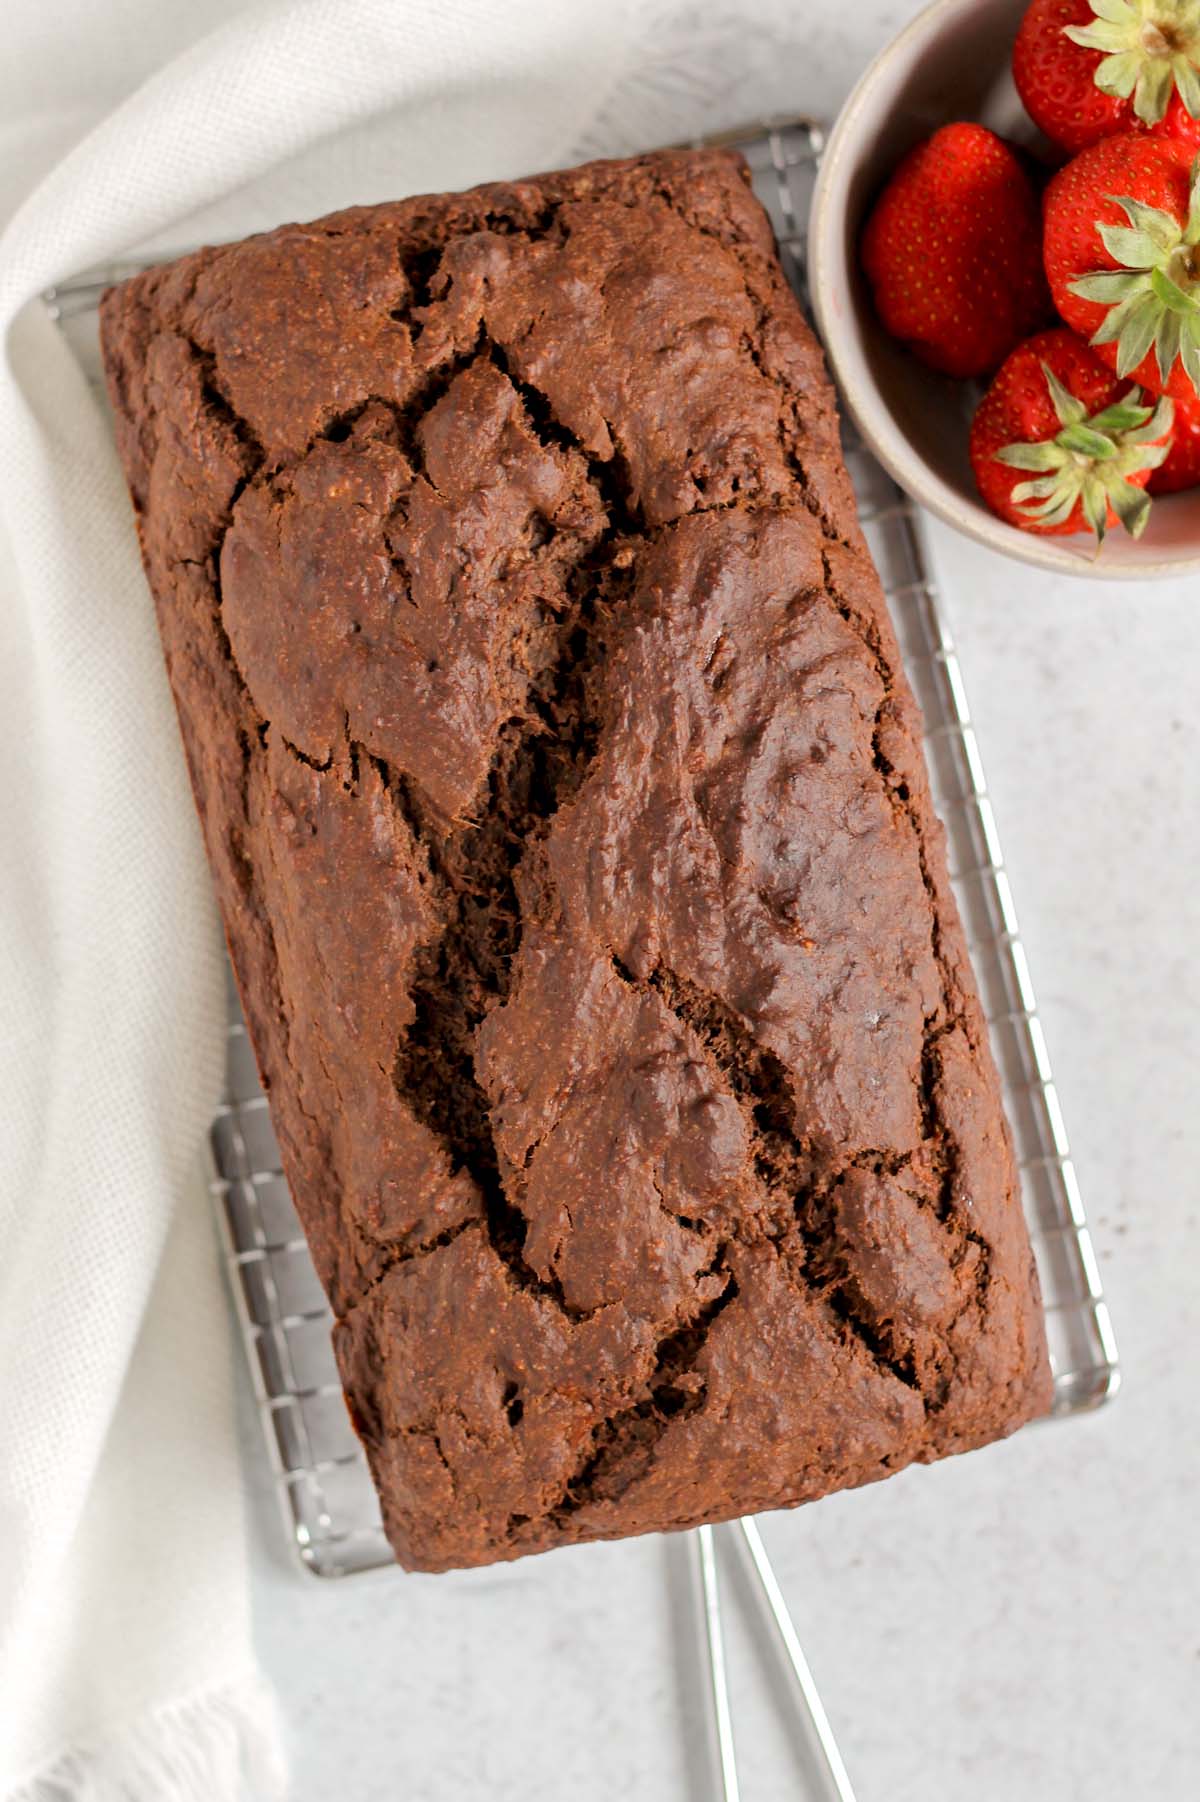 Unsliced loaf of chocolate protein bread on a rectangular cooling rack with a bowl of strawberries on the side.